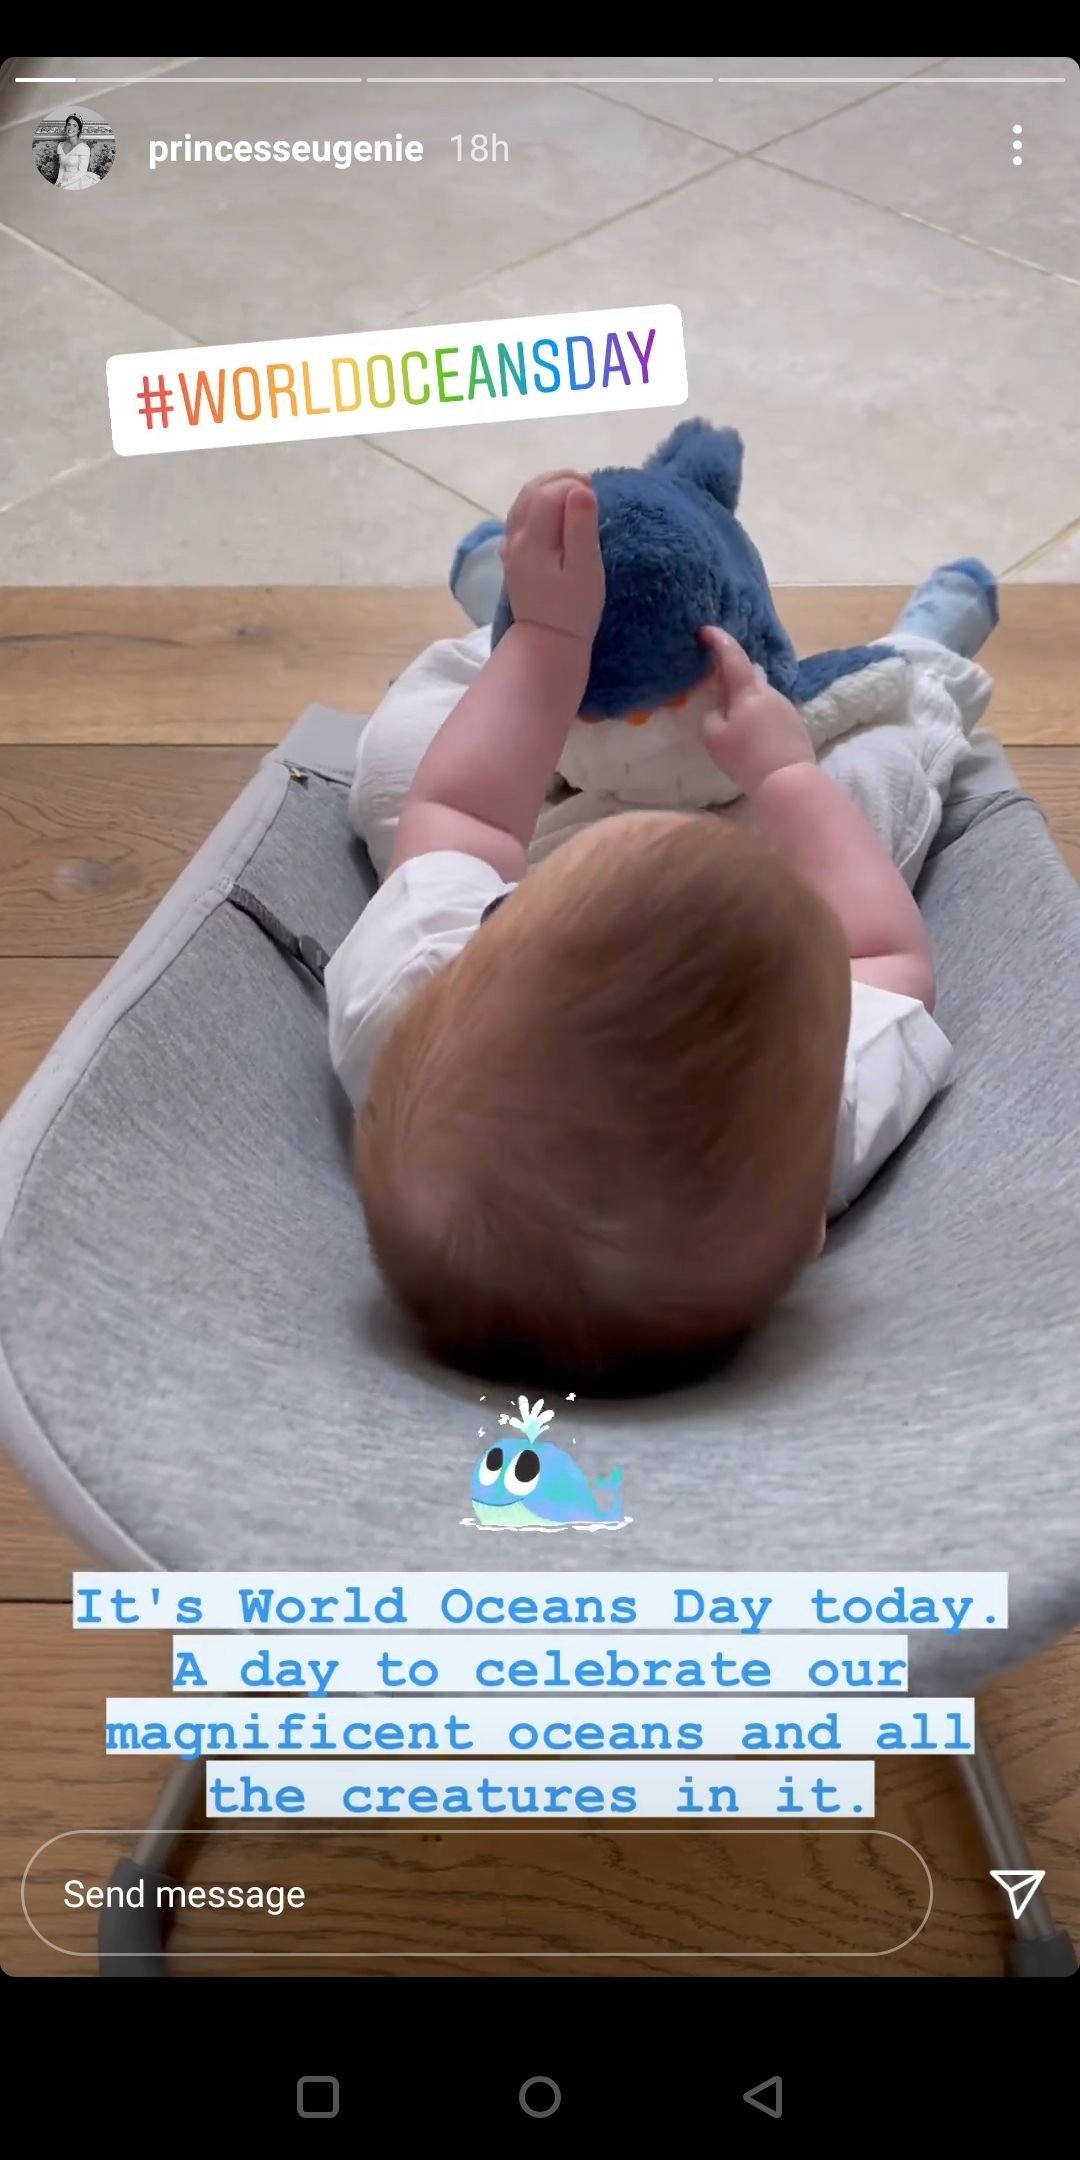 Princess Eugenie's son, August, cuddling a fluffy toy shark for World Oceans Day, 2021, London, England. | Photo: Instagram/princeseugenie